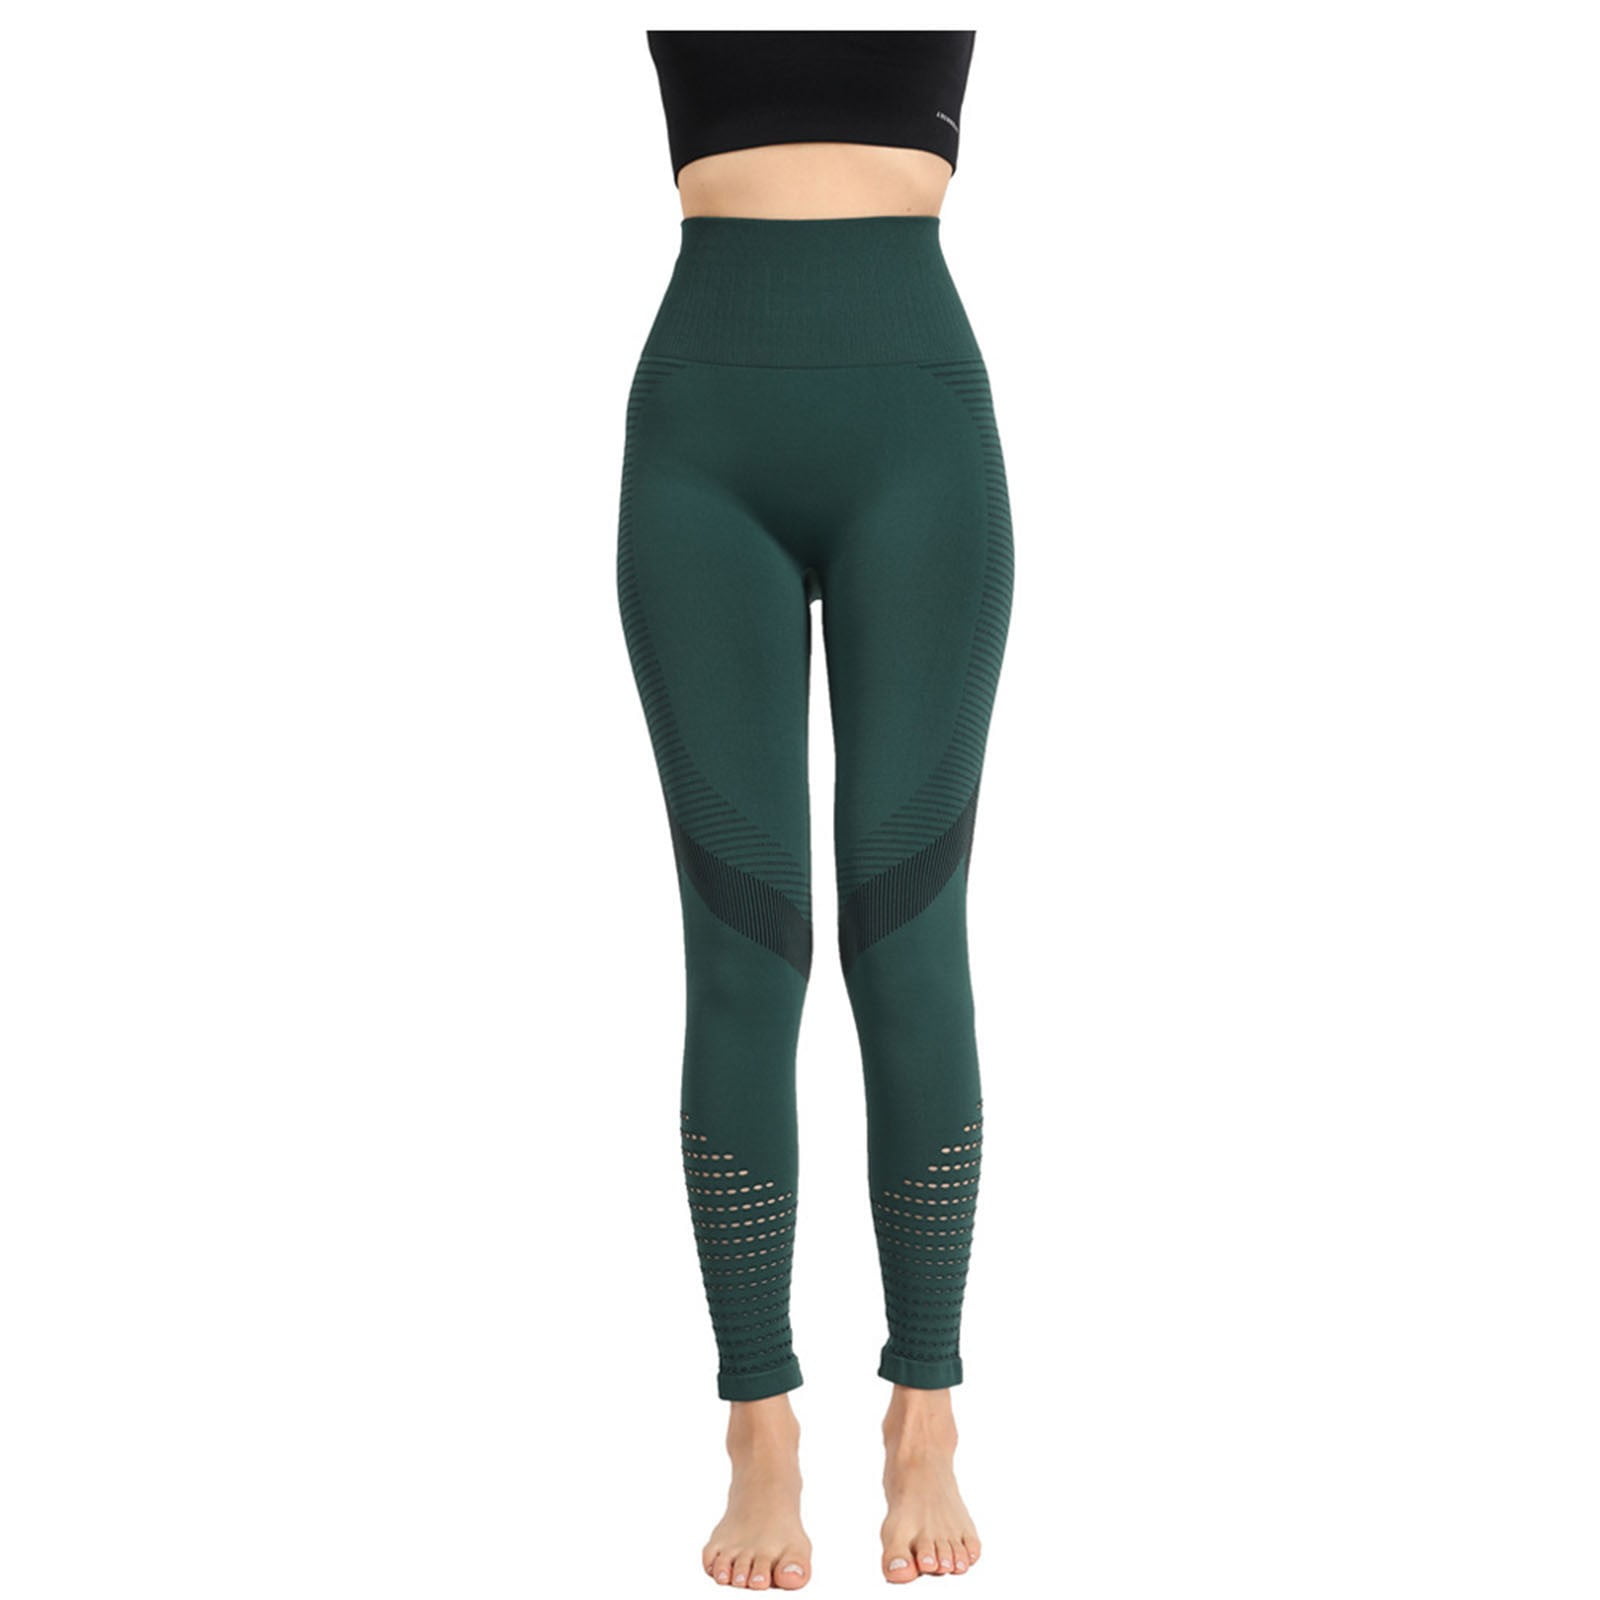 Unbranded Womens Green Athletic Compression Leggings Size Small